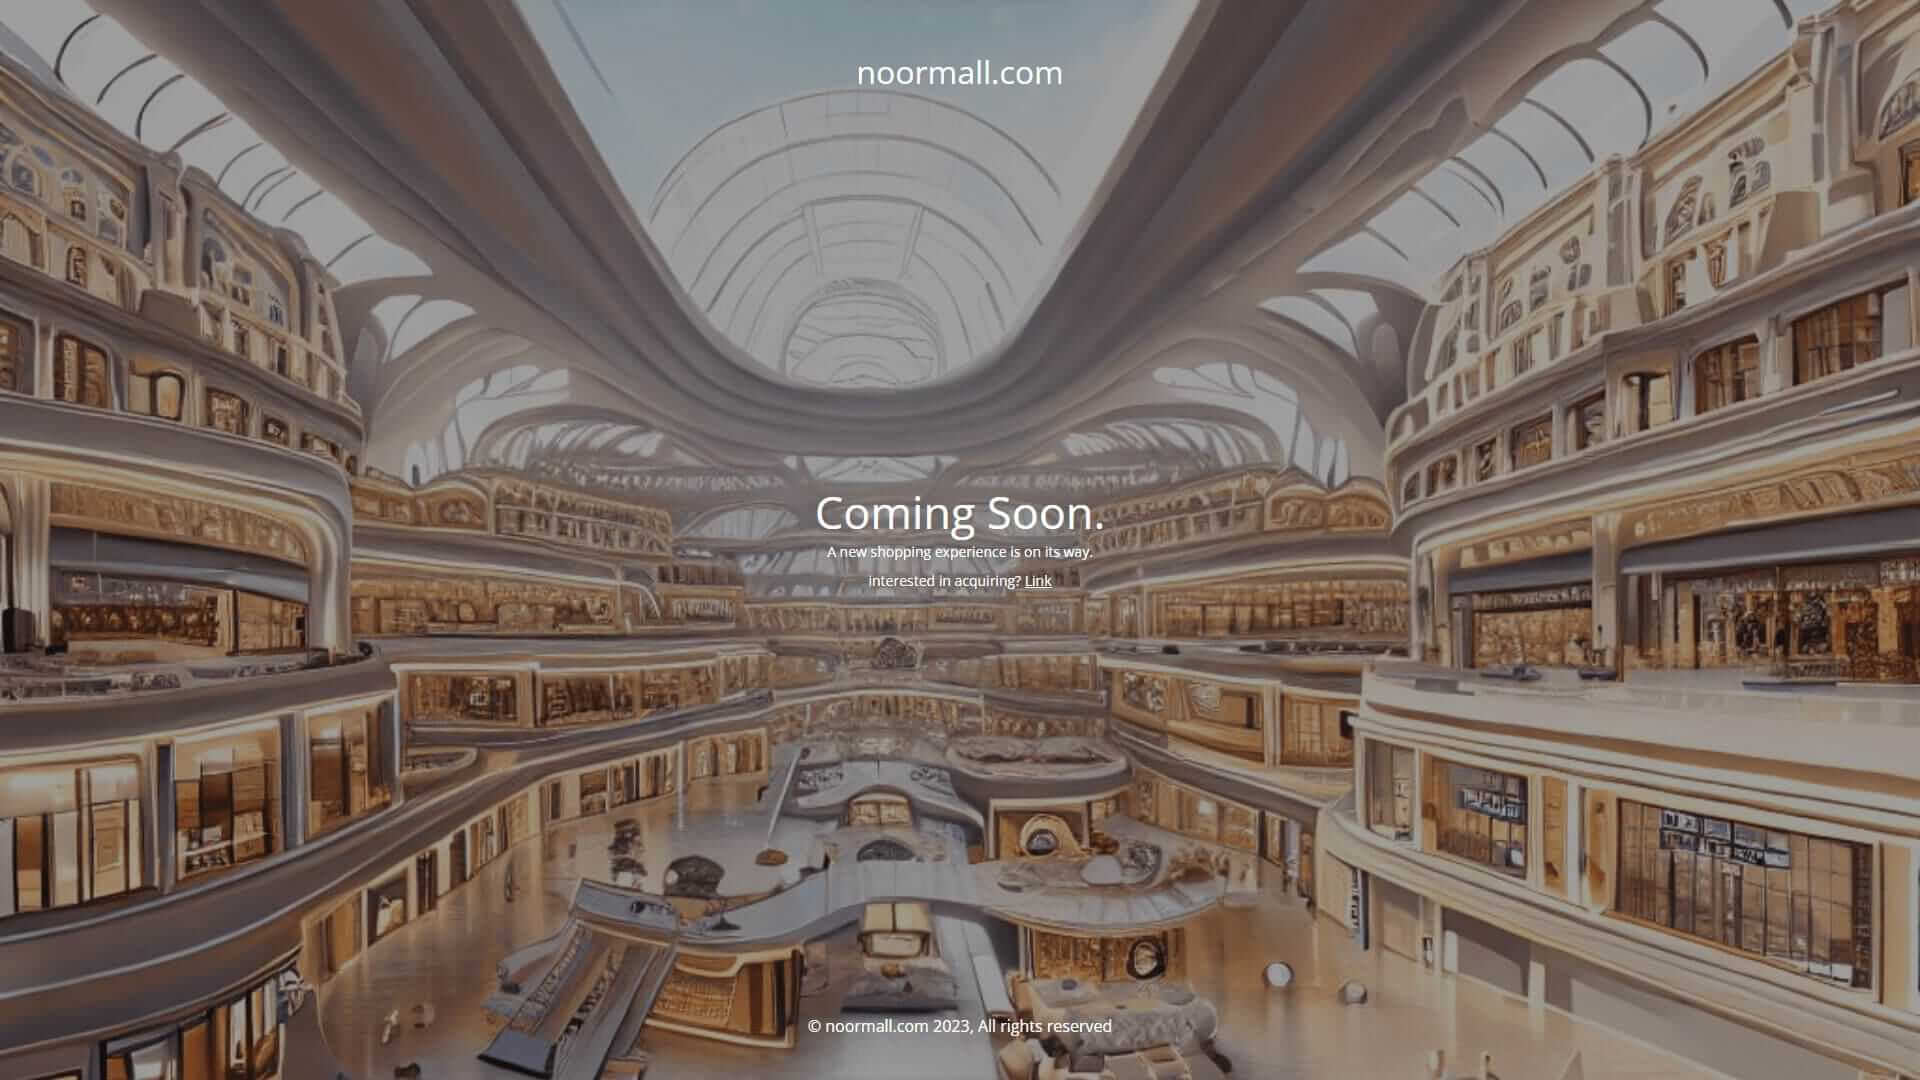 noormall.com A new shopping experience is on its way. UAE, Dubai, and Saudia Arabia and GCC and Middleeast05